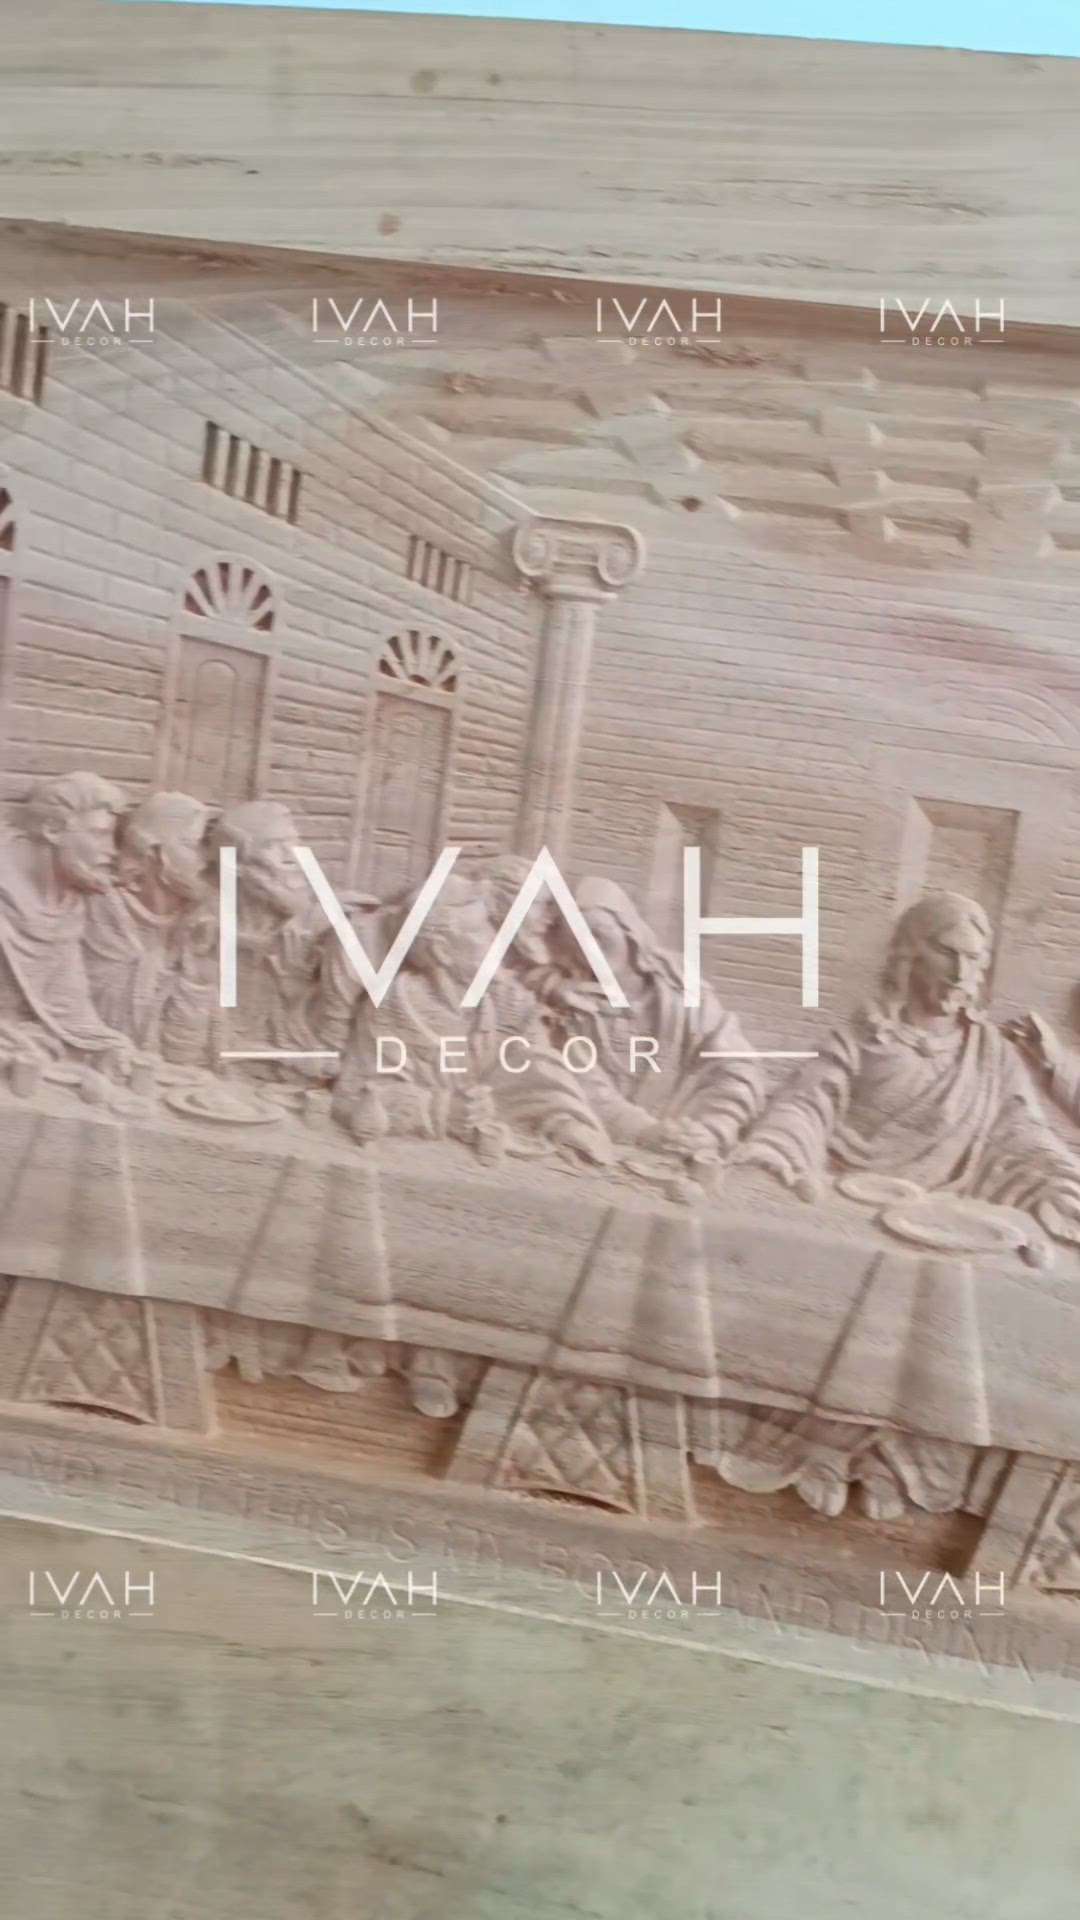 Last Supper wood Carving 
#ivah #ivahdecor 
7561091369